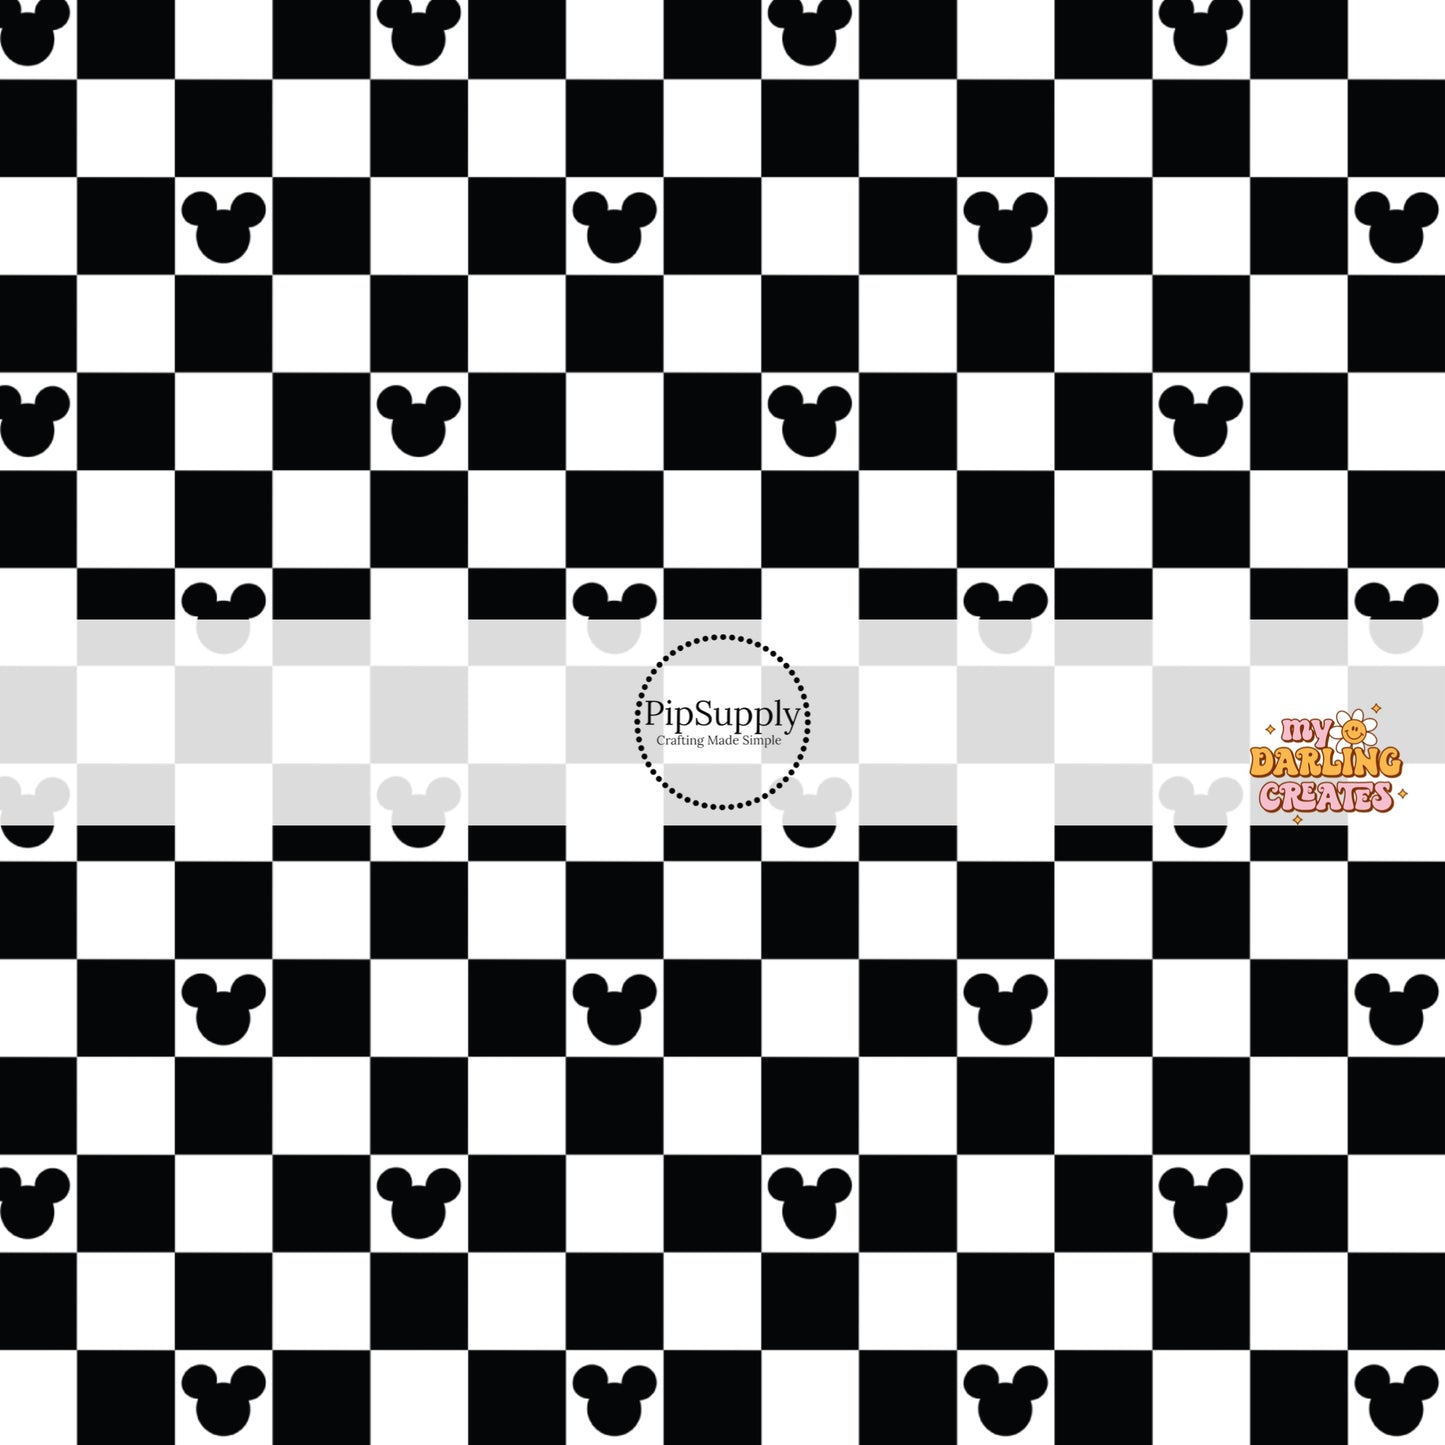 Black and white checkered fabric by the yard with back mouse head silhouette's.